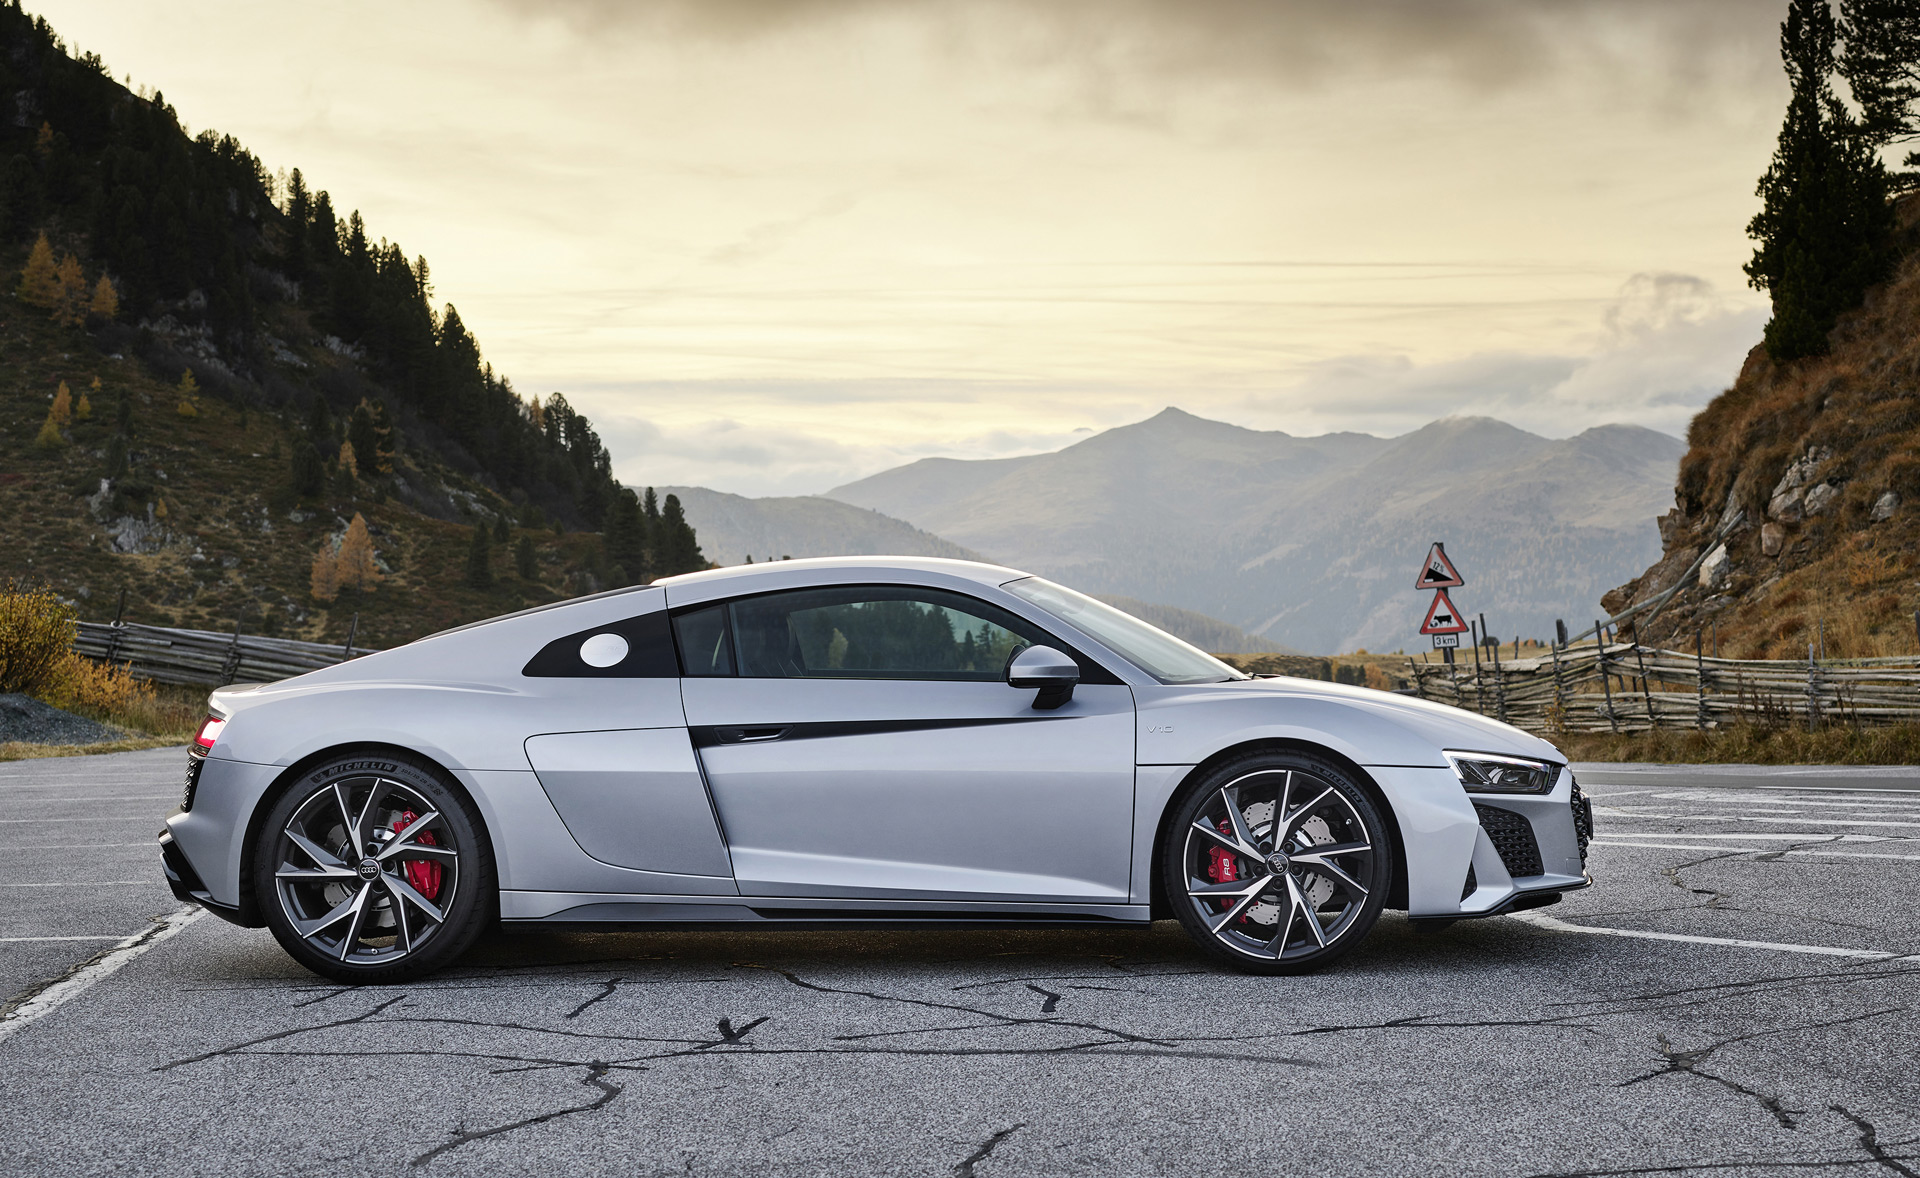 2021 Audi R8 Review, Pricing, and Specs